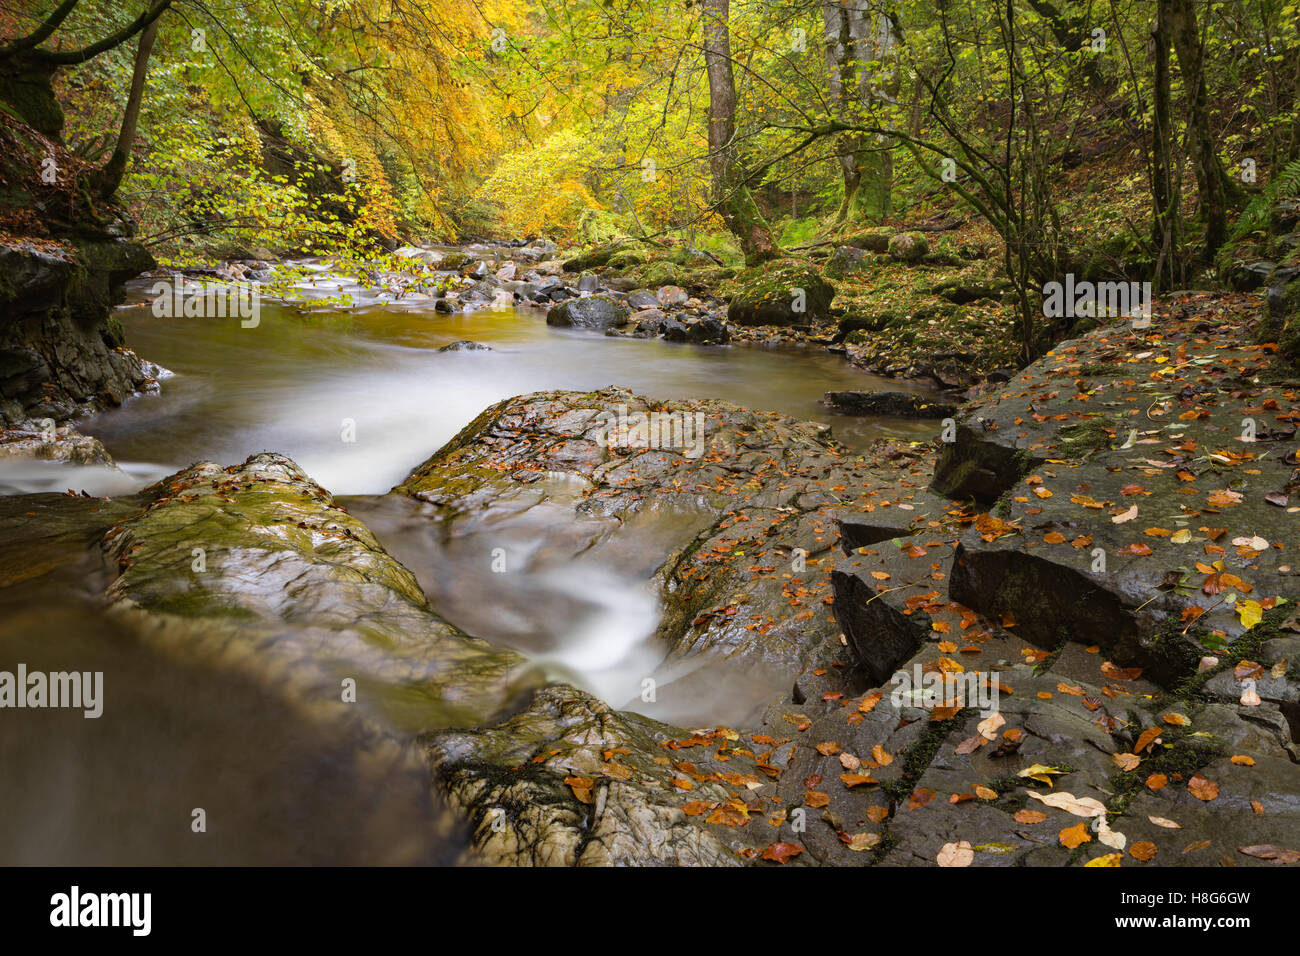 The Birks of Aberfeldy along the Moness Burn in Perthshire, Scotland, is an explosion of colour in Autumn. Stock Photo